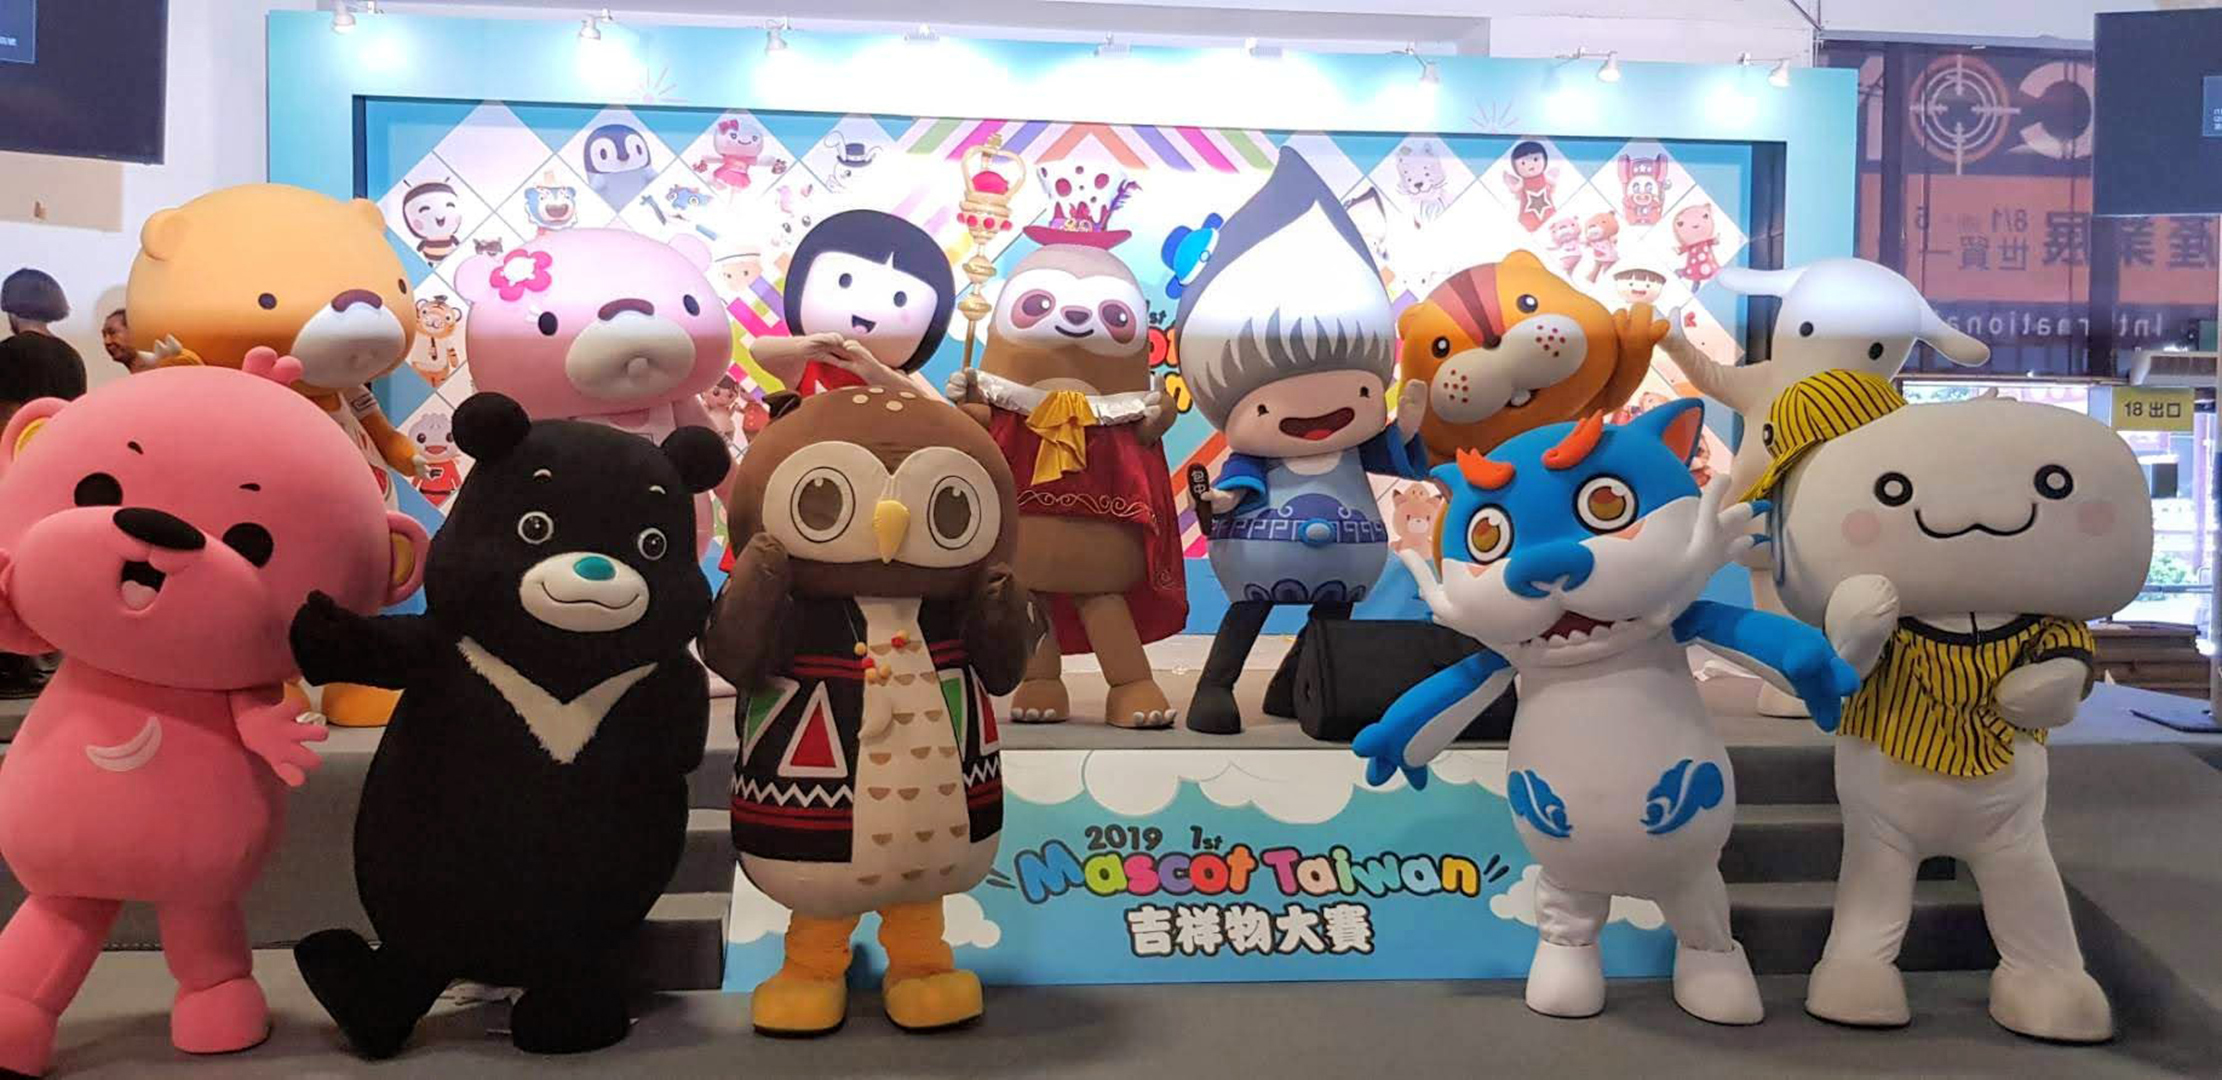 The group photo of 2019 the First Mascot Competition.